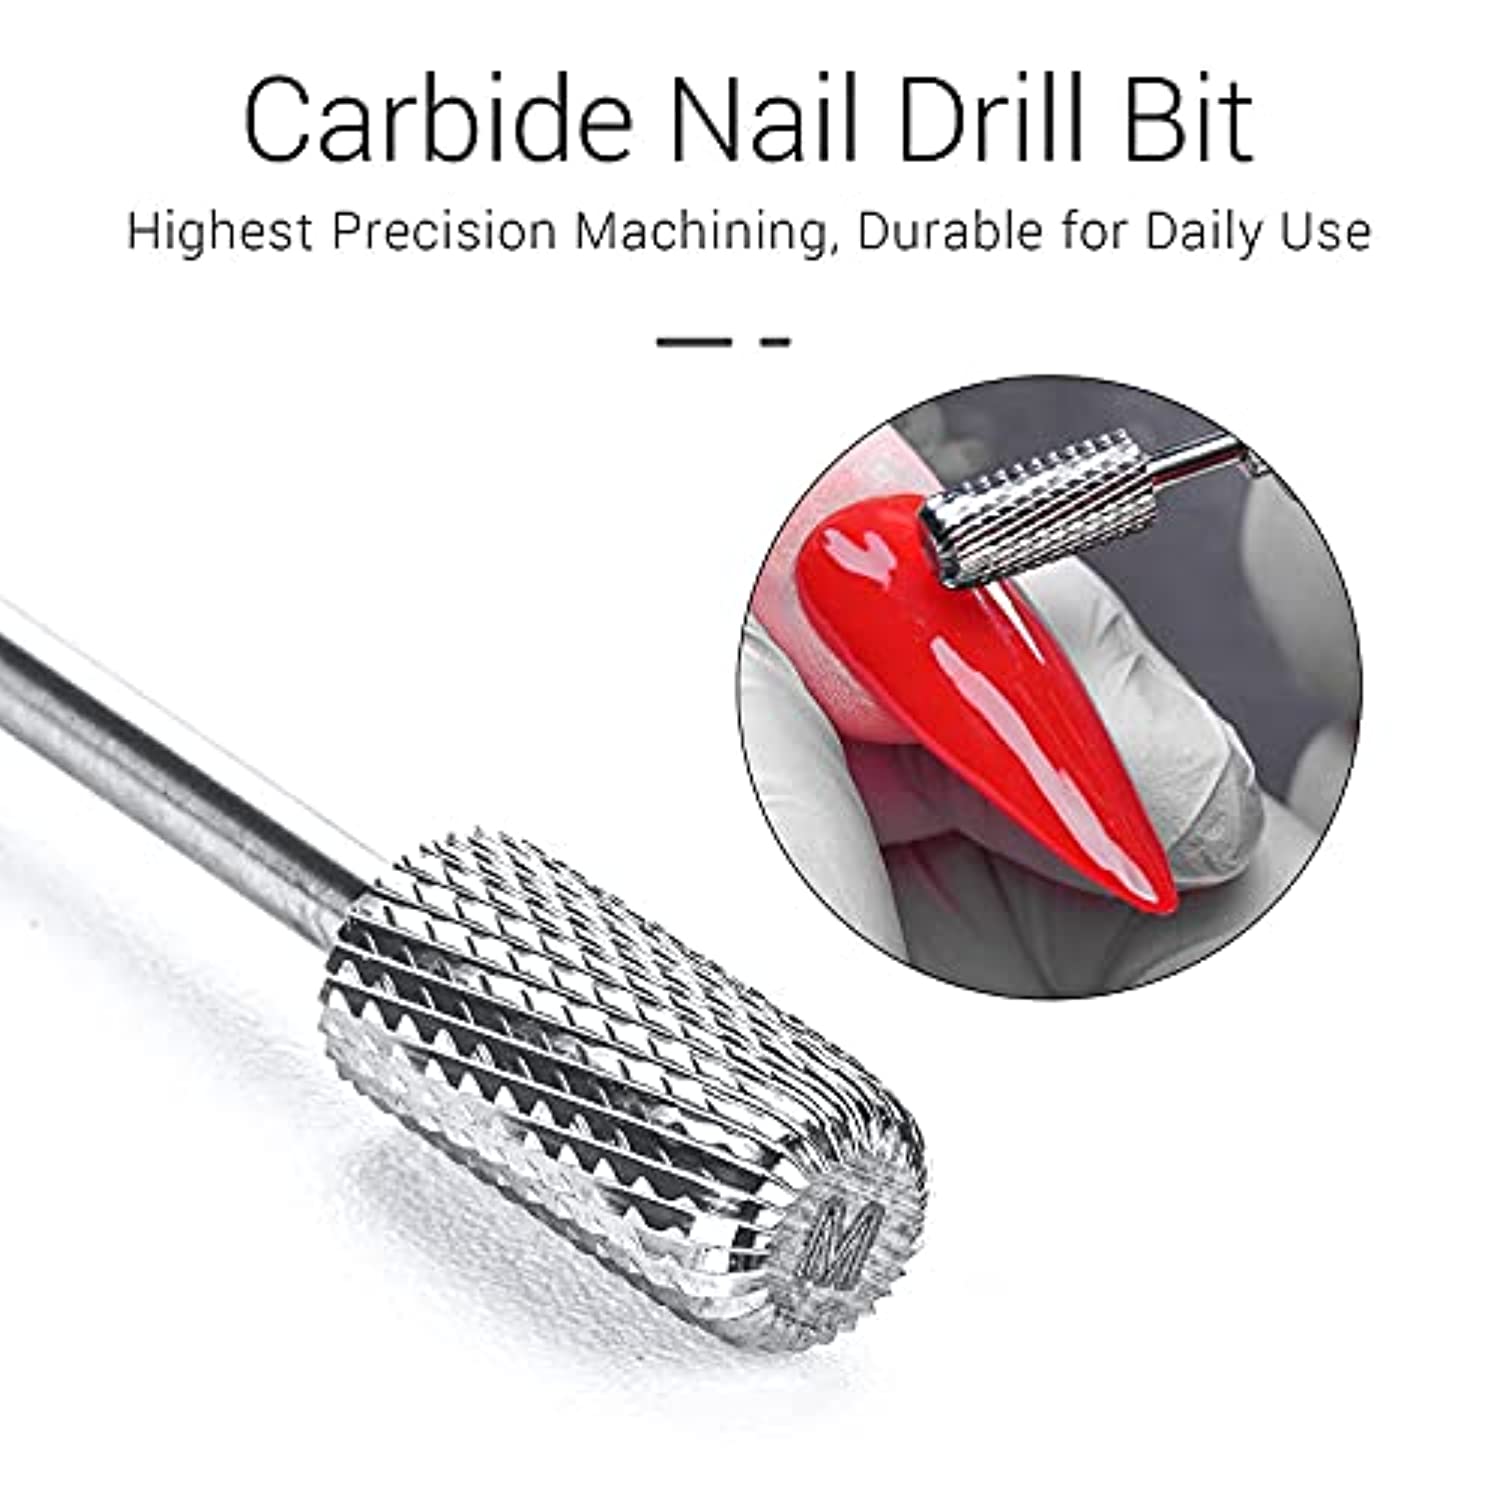 MelodySusie Tungsten Carbide Nail Drill Bit Set for Acrylic Hard Gel Nails Remove, Cuticle Clean Nail Drill Bit, 4 Week Inverted Backfill Nail Drill Bit, Safety Nail Drill Bit, 5 in 1 Nail Drill Bit